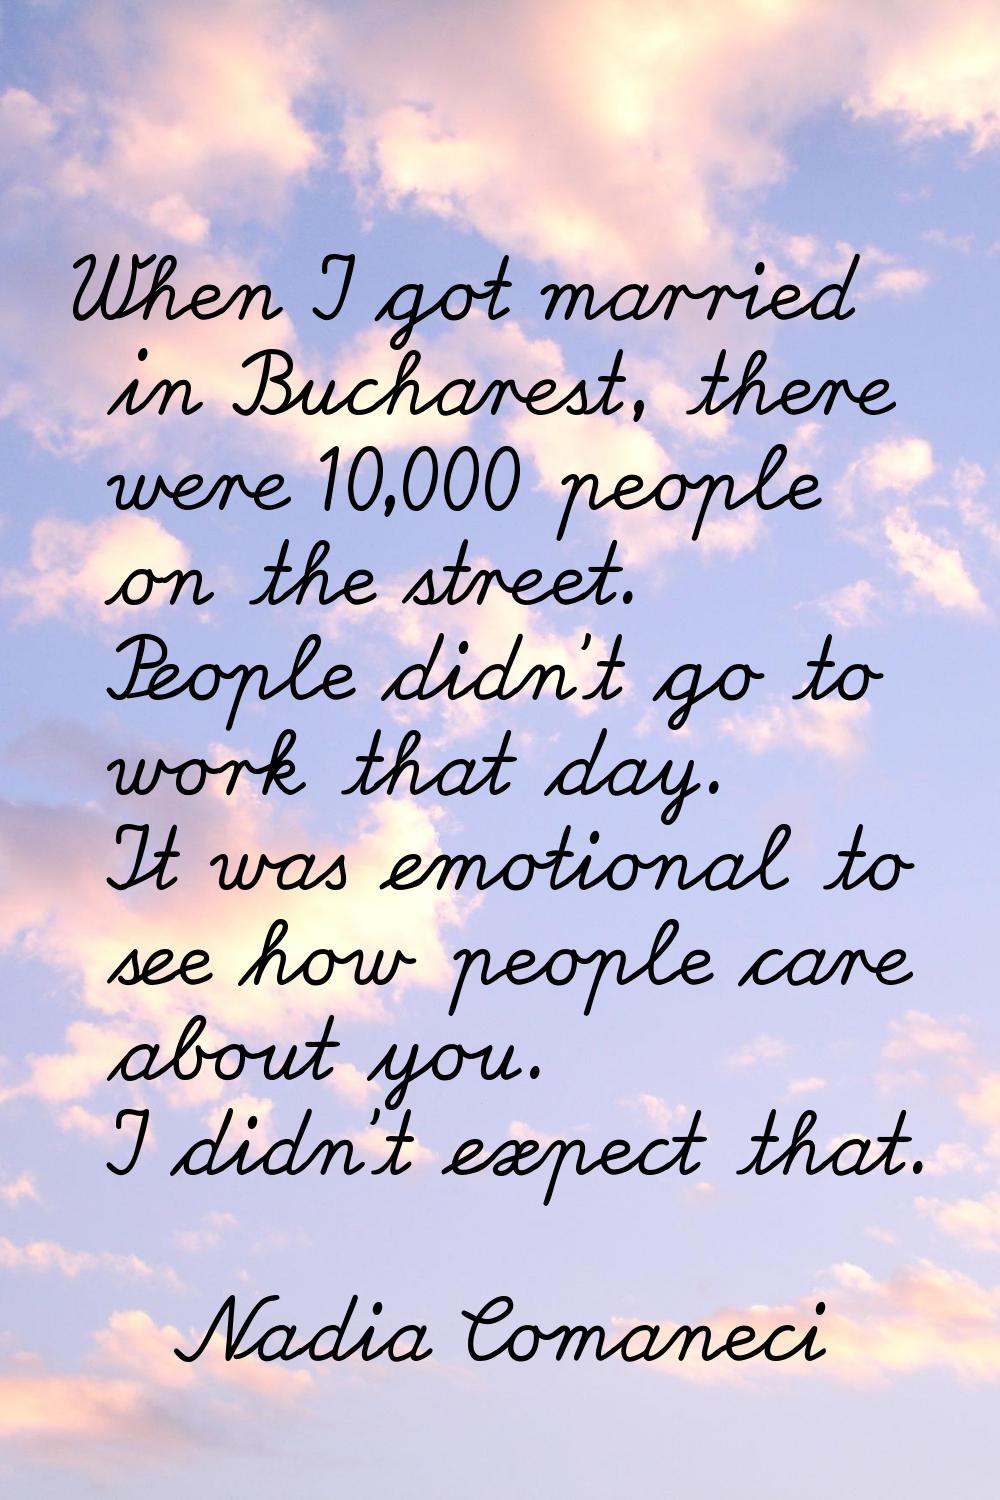 When I got married in Bucharest, there were 10,000 people on the street. People didn't go to work t